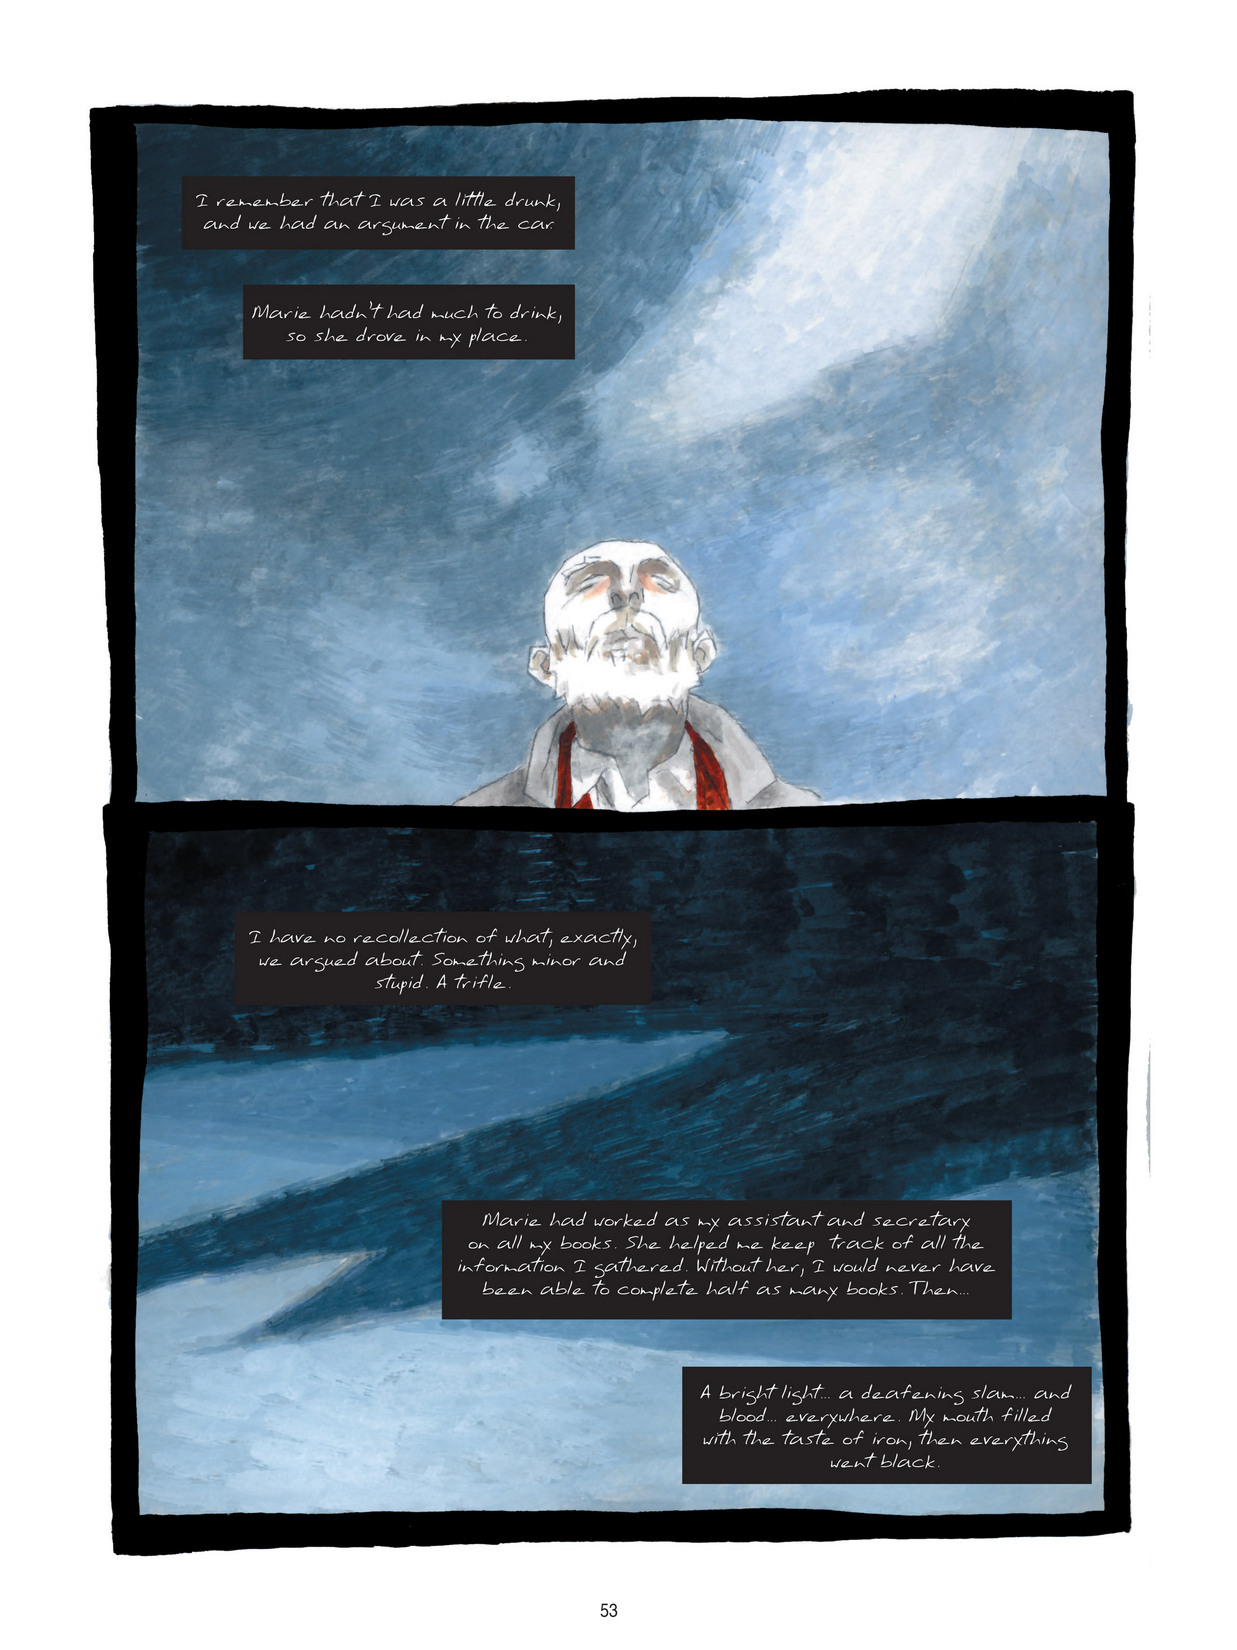 Read online The Red Diary / The Re[a]d Diary comic -  Issue # TPB - 54